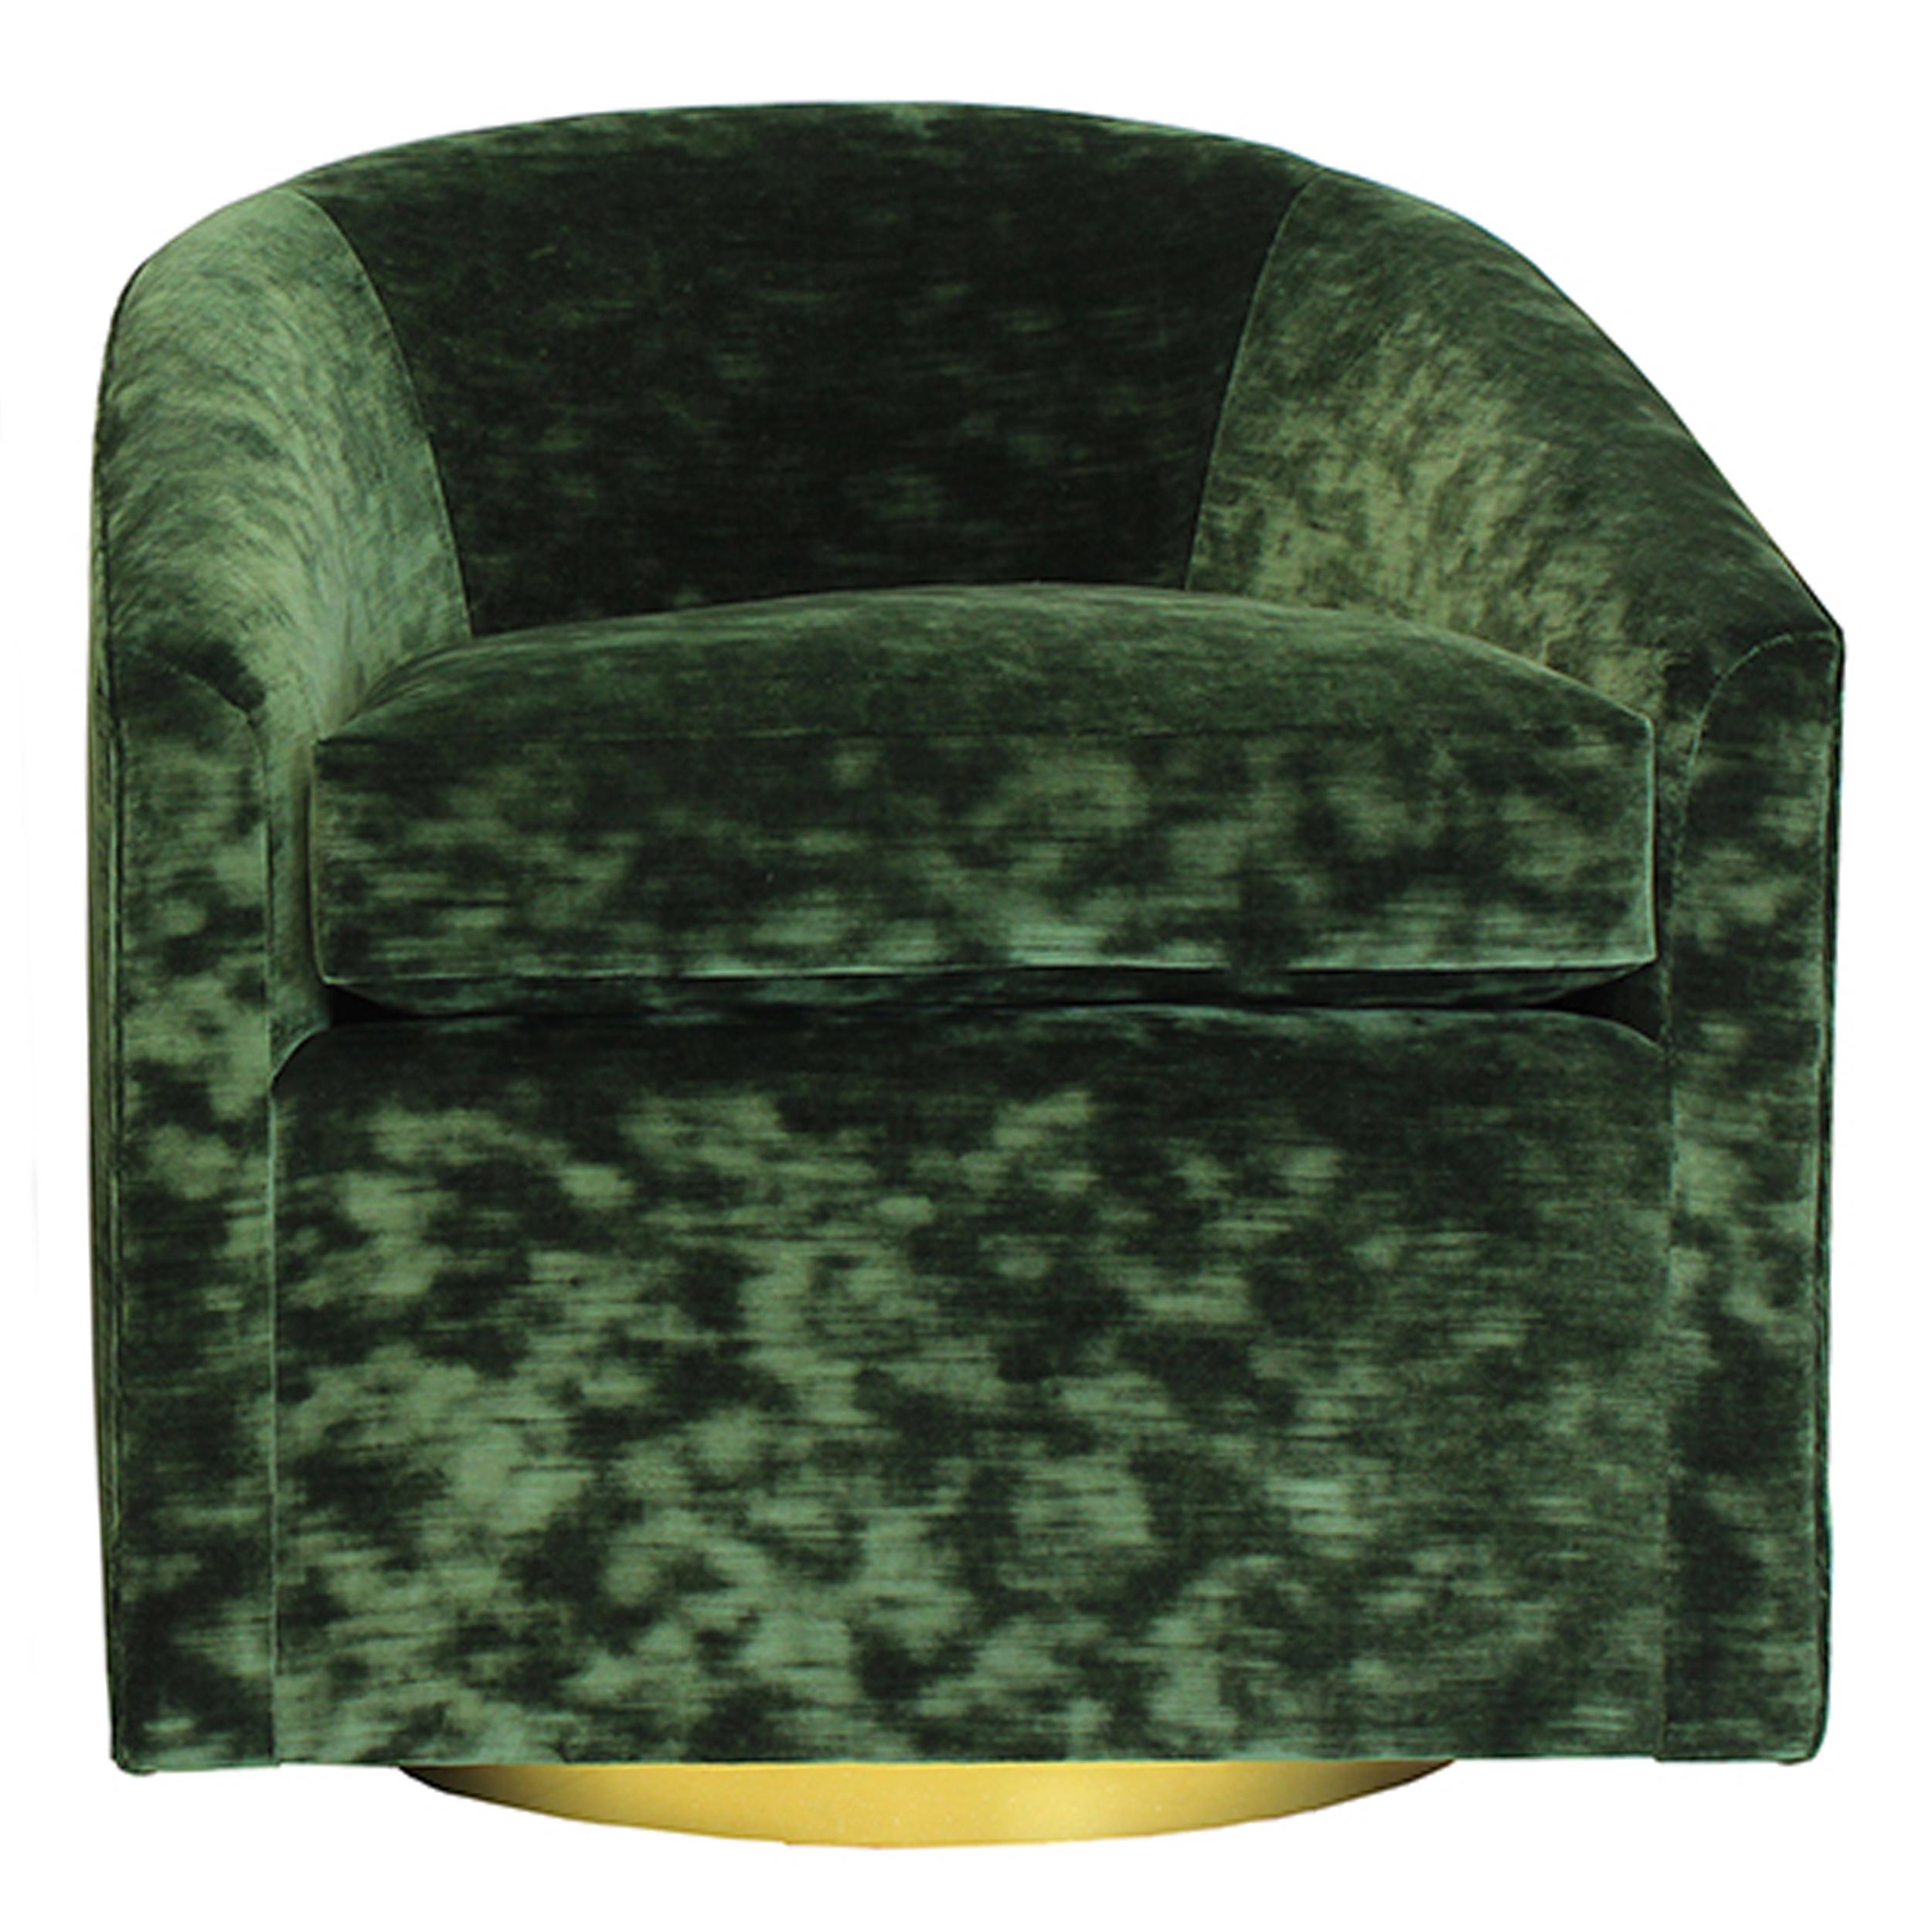 About this piece
Made to order, this piece is small in stature but can still accommodate larger adults. The cushion is high density foam with a feather/down wrap. The swivel is 360 degress.

How we work
Made to order by Connecticut-based furniture